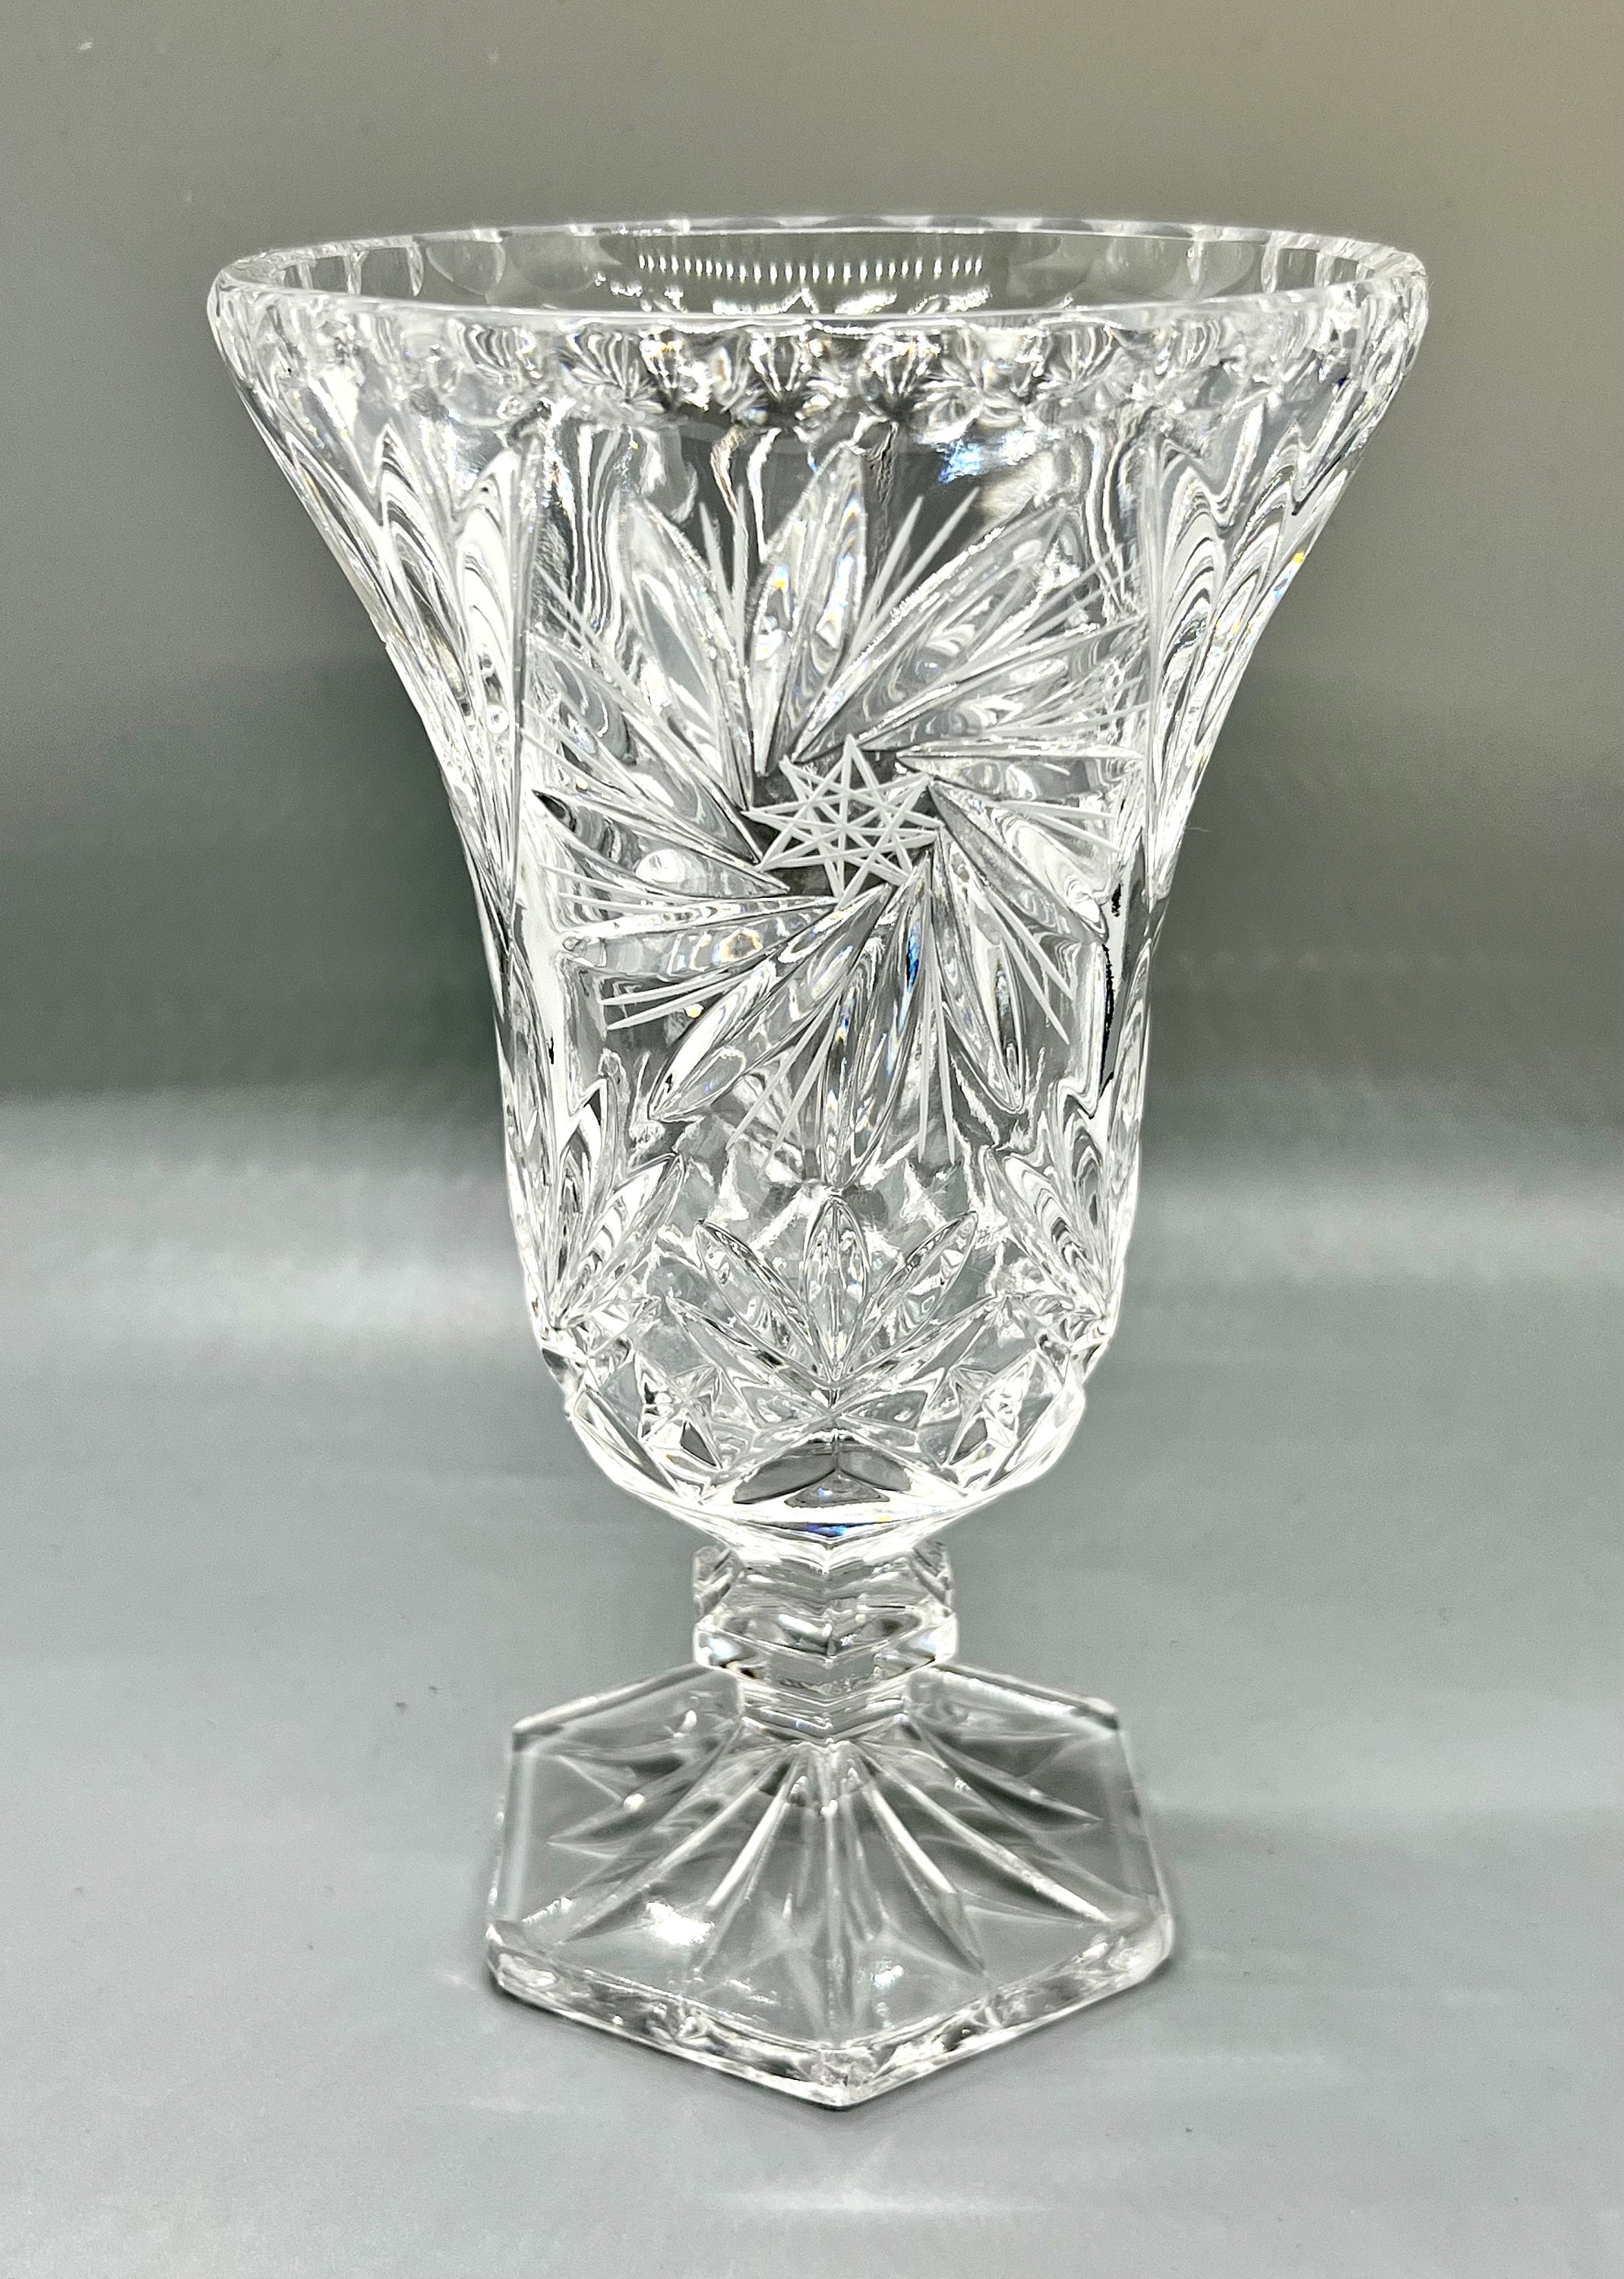 Waterford crystal bud vase: 386,000 ppm Lead (39% Lead)! Crystal items can  passively create Lead dust in your home.